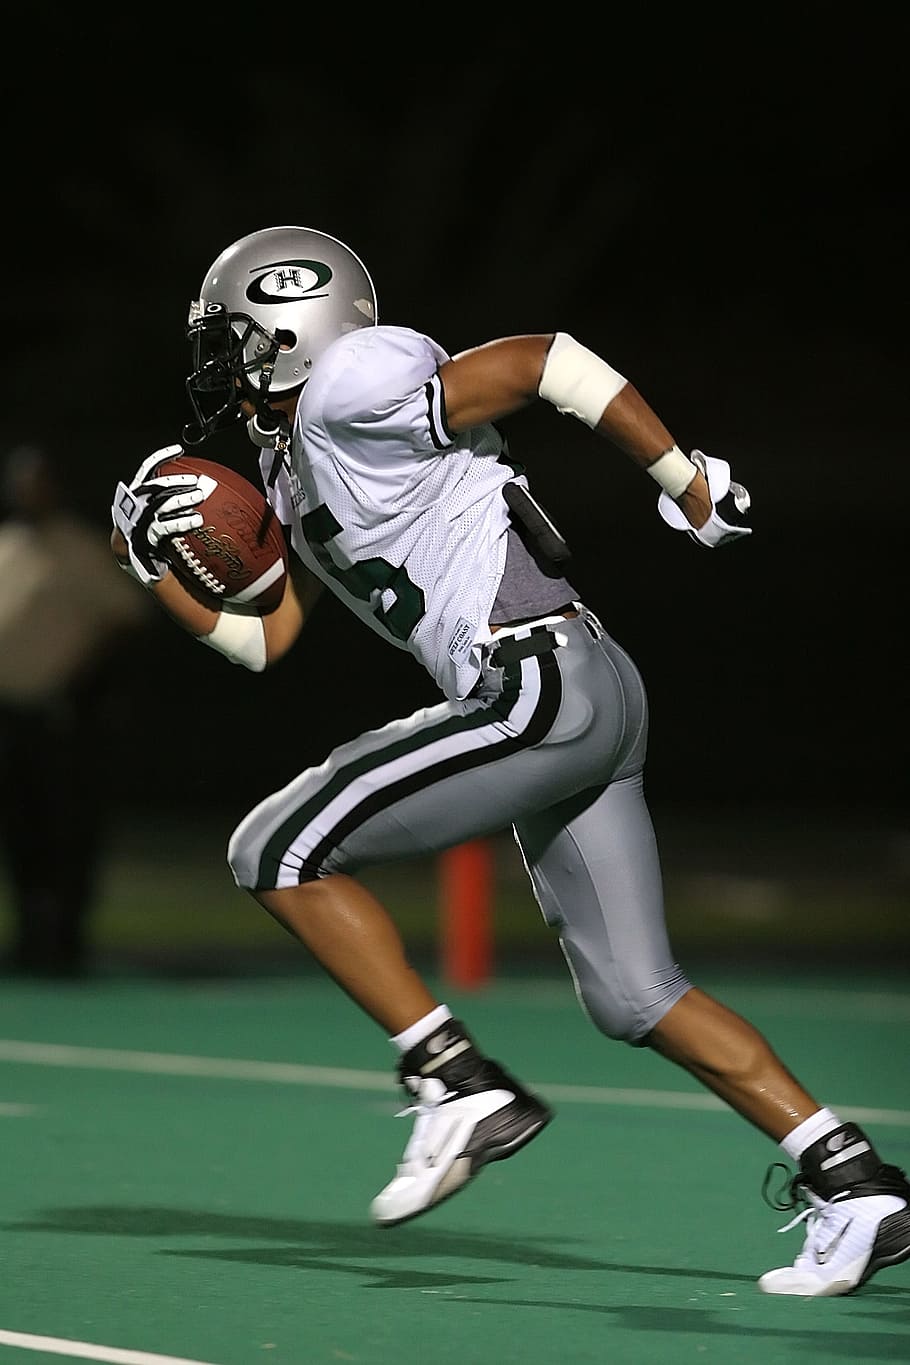 Football Player Holding Football, action, American football, athlete